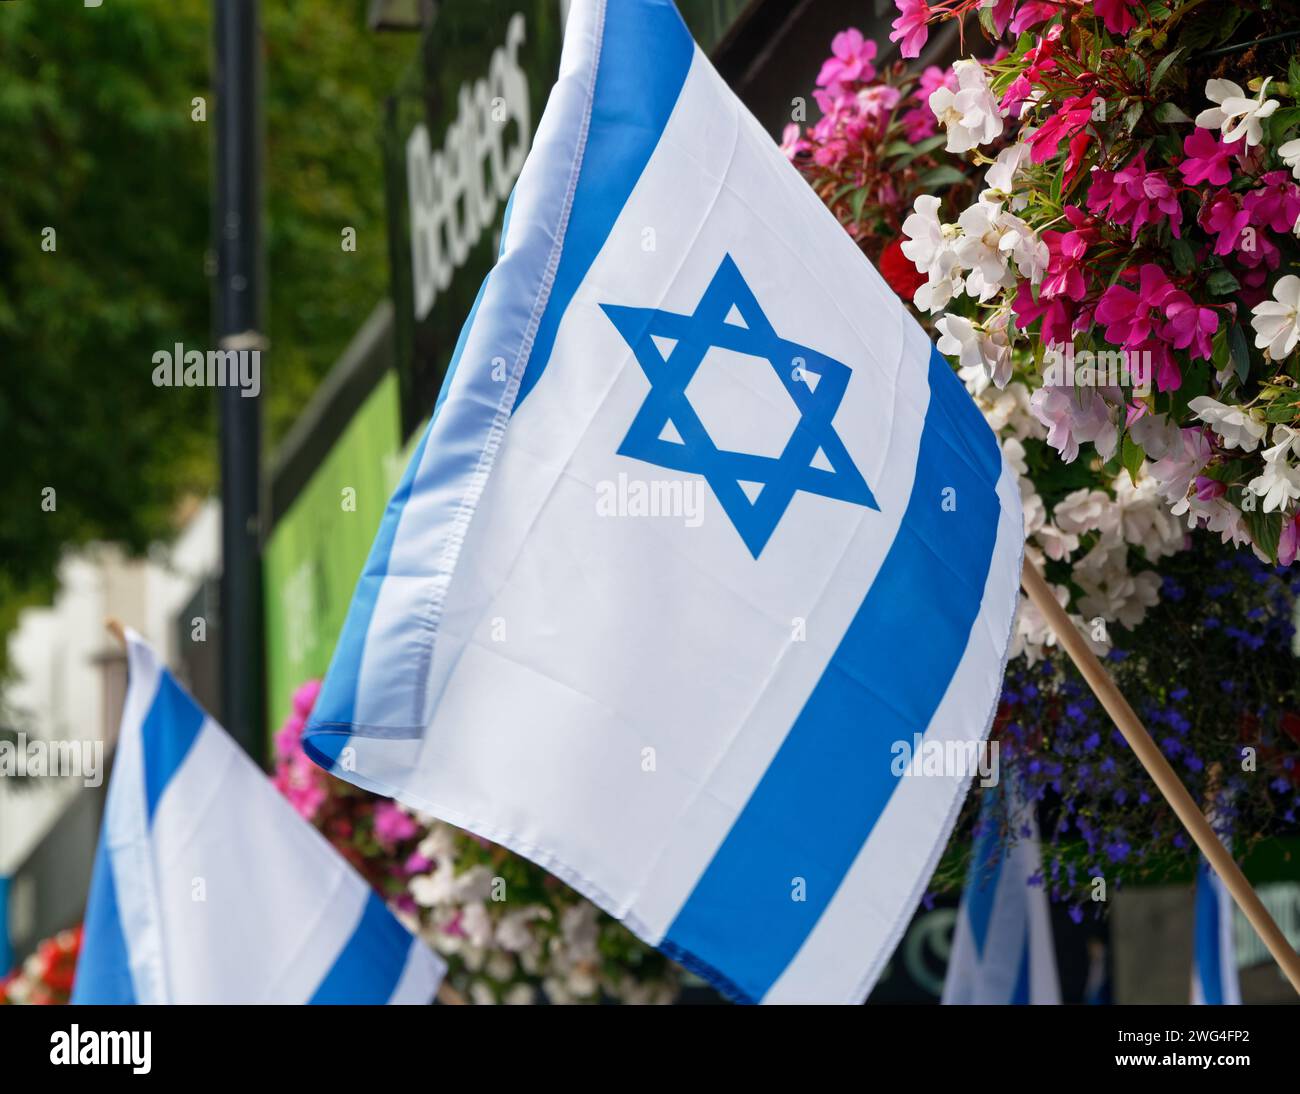 An Israeli flag with the Shield of David is held high against a hanging basket of flowers during a protest Stock Photo